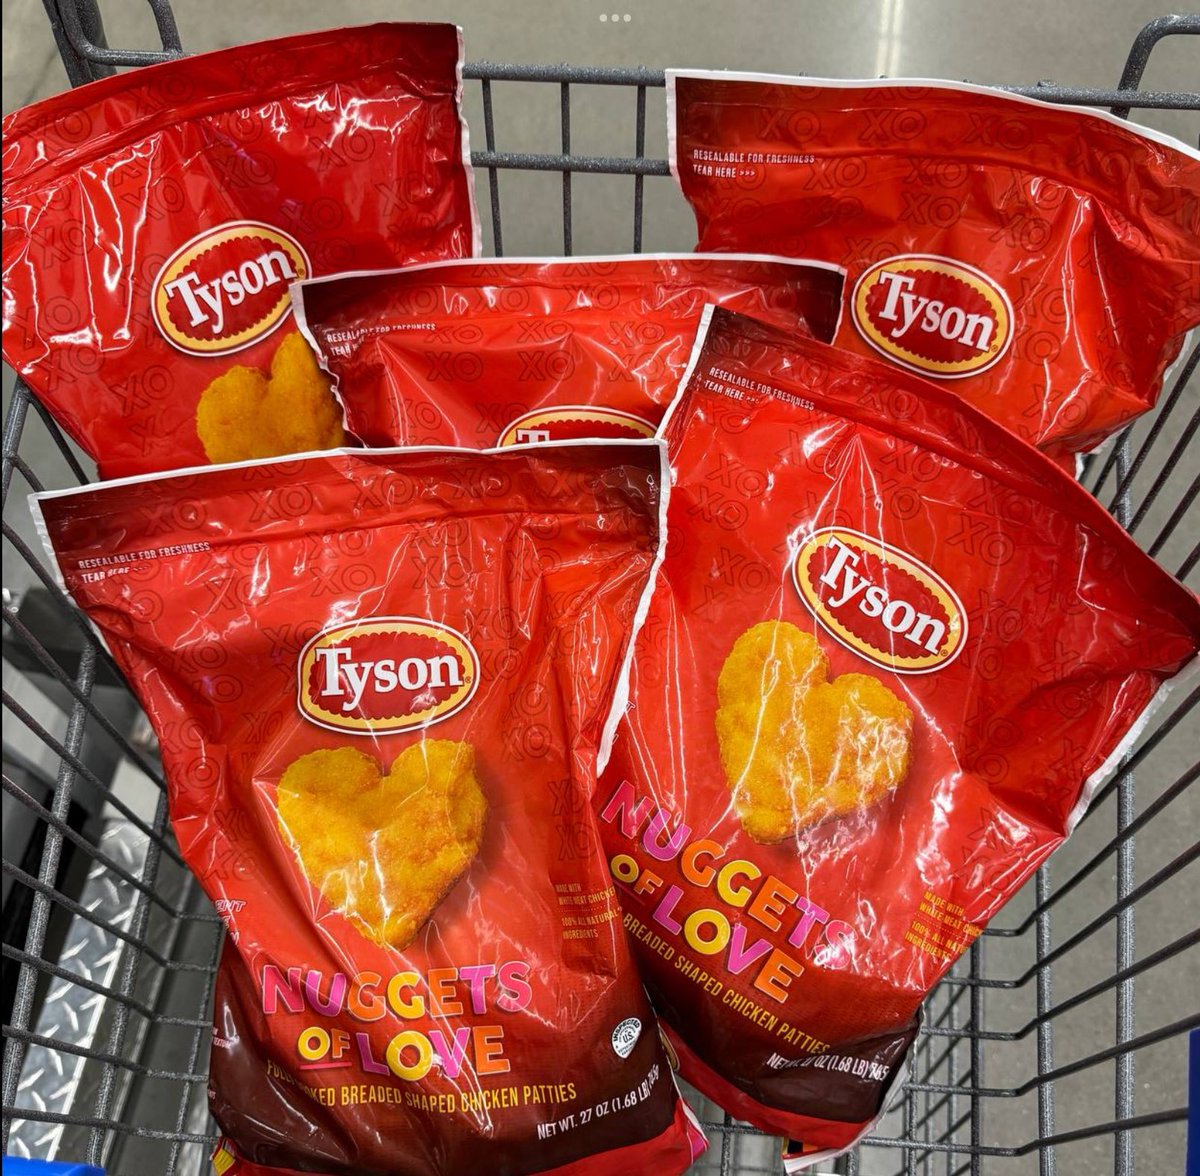 These Tyson Nuggets of love ringing up for$1.74 at Walmart.